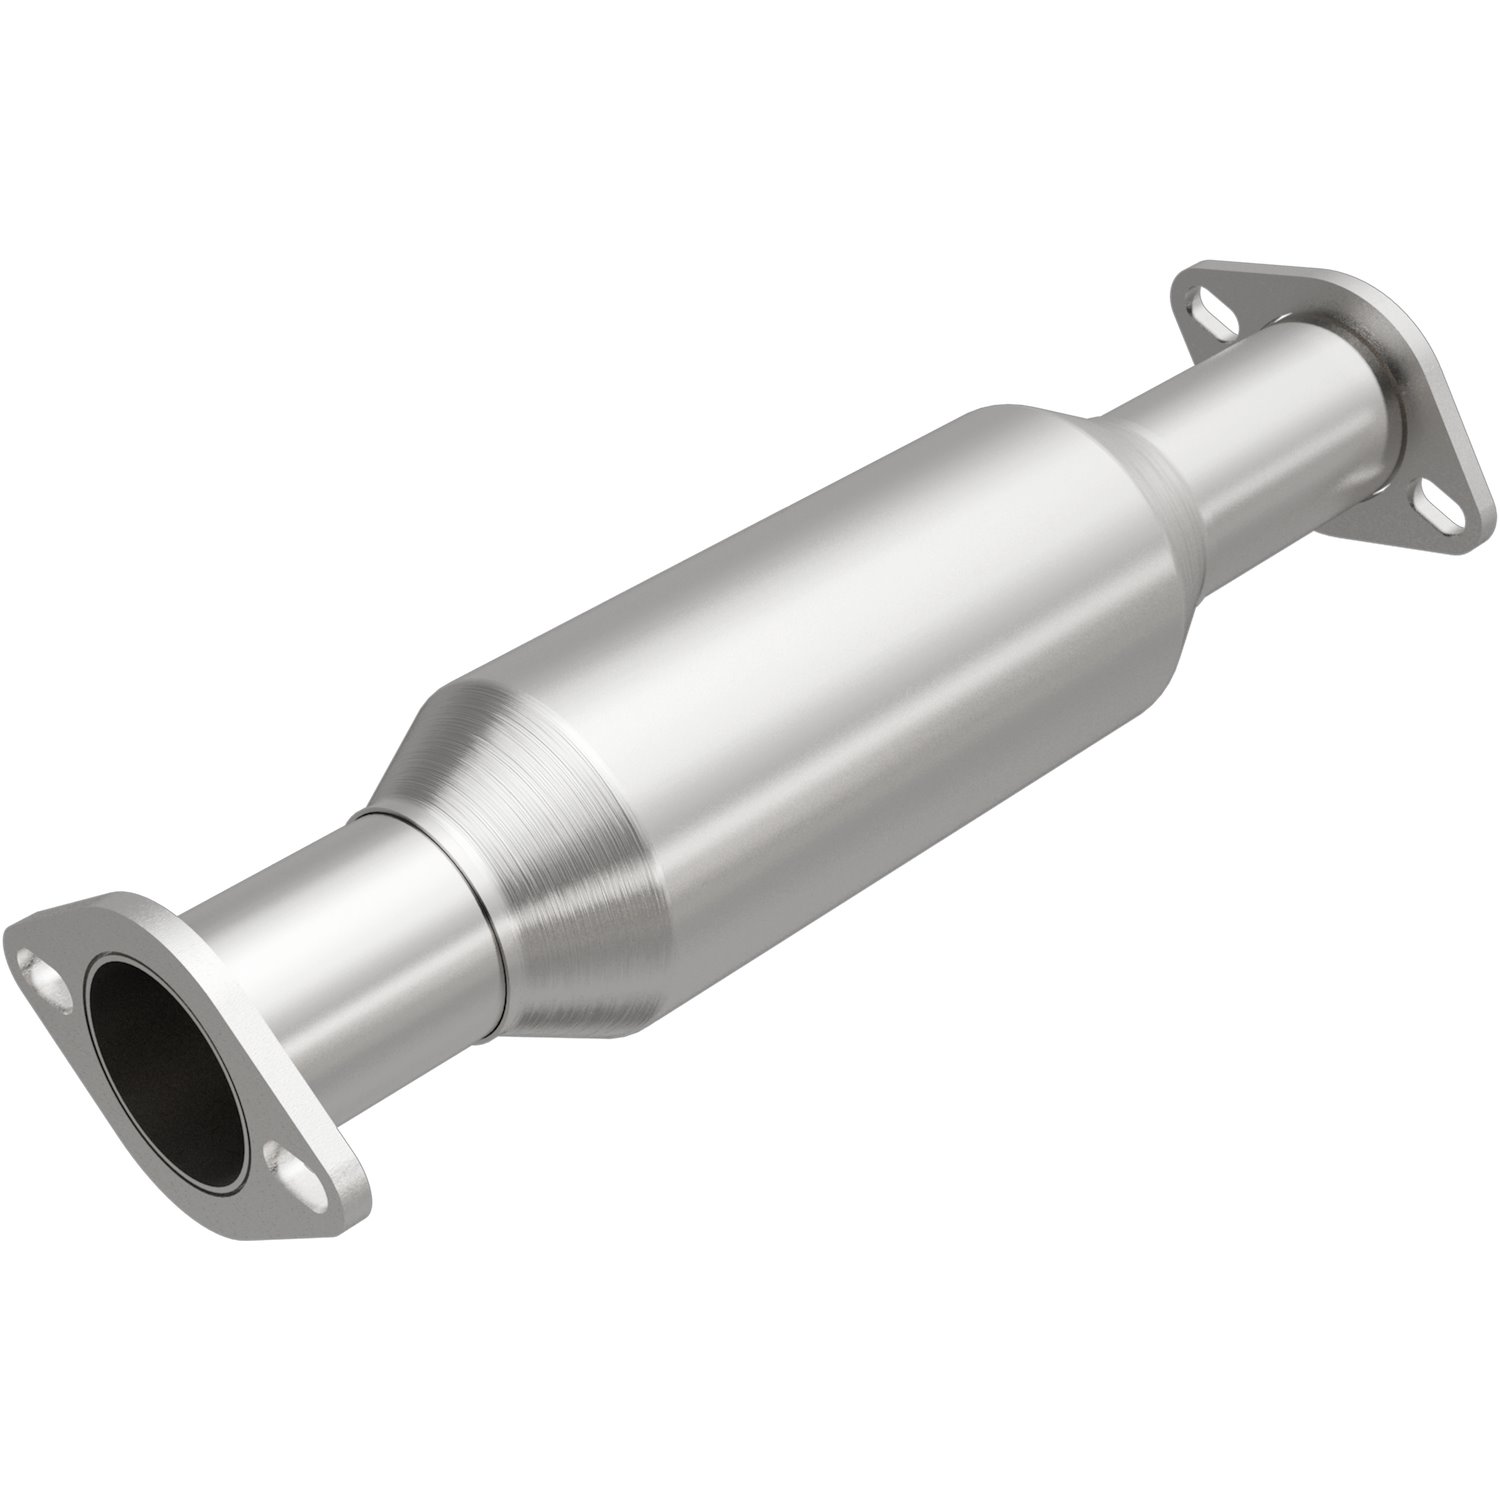 OEM Grade Federal / EPA Compliant Direct-Fit Catalytic Converter 51399